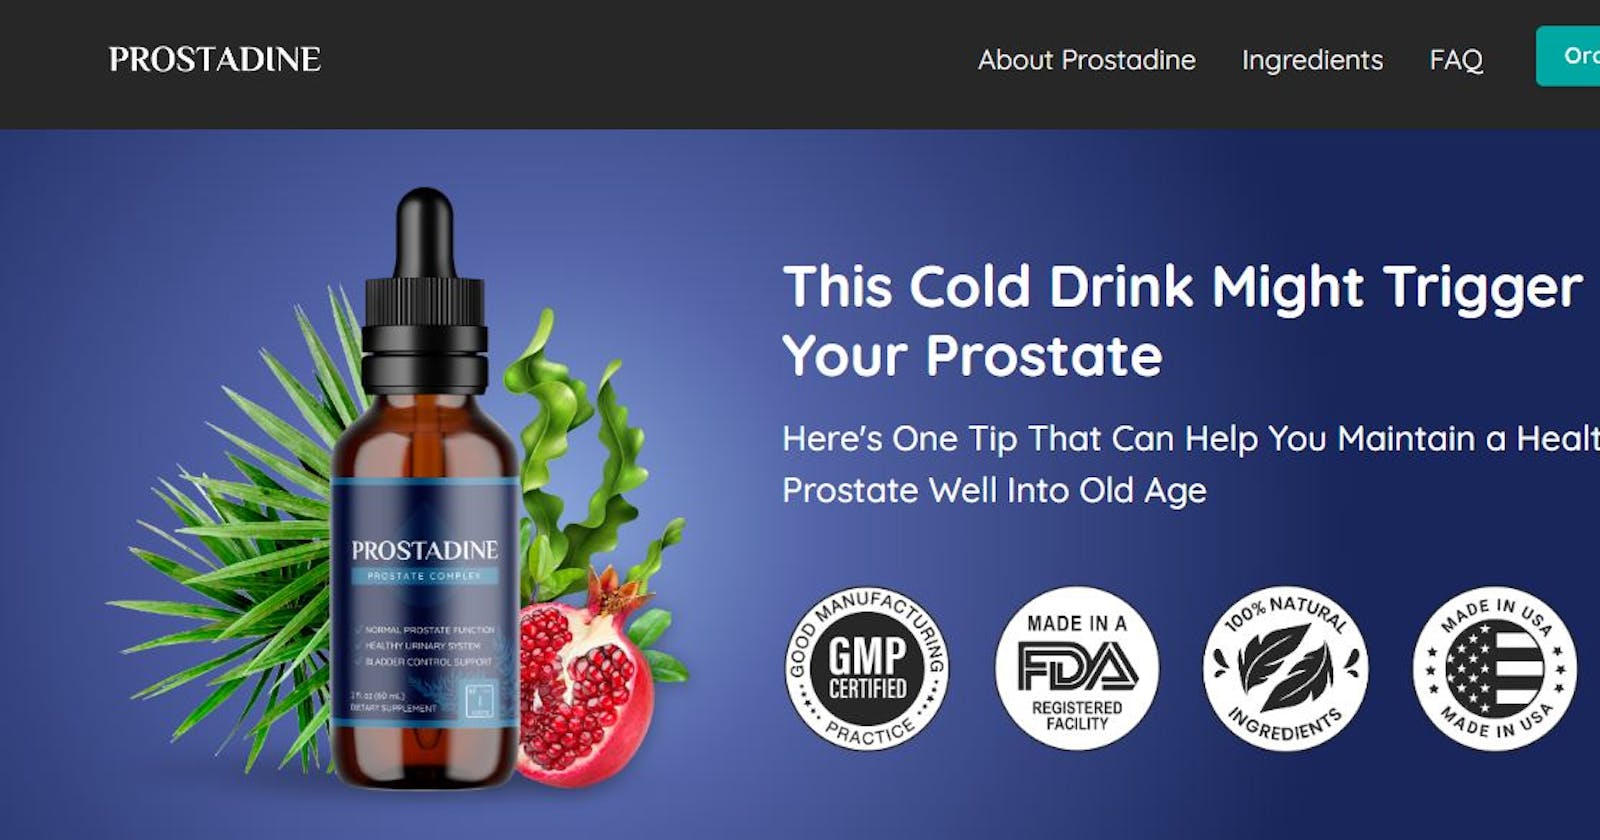 Prostadine New Zealand Reviews 2023 – Waste of Money Or Does Prostadine Drops Work? Ingredients Exposed!